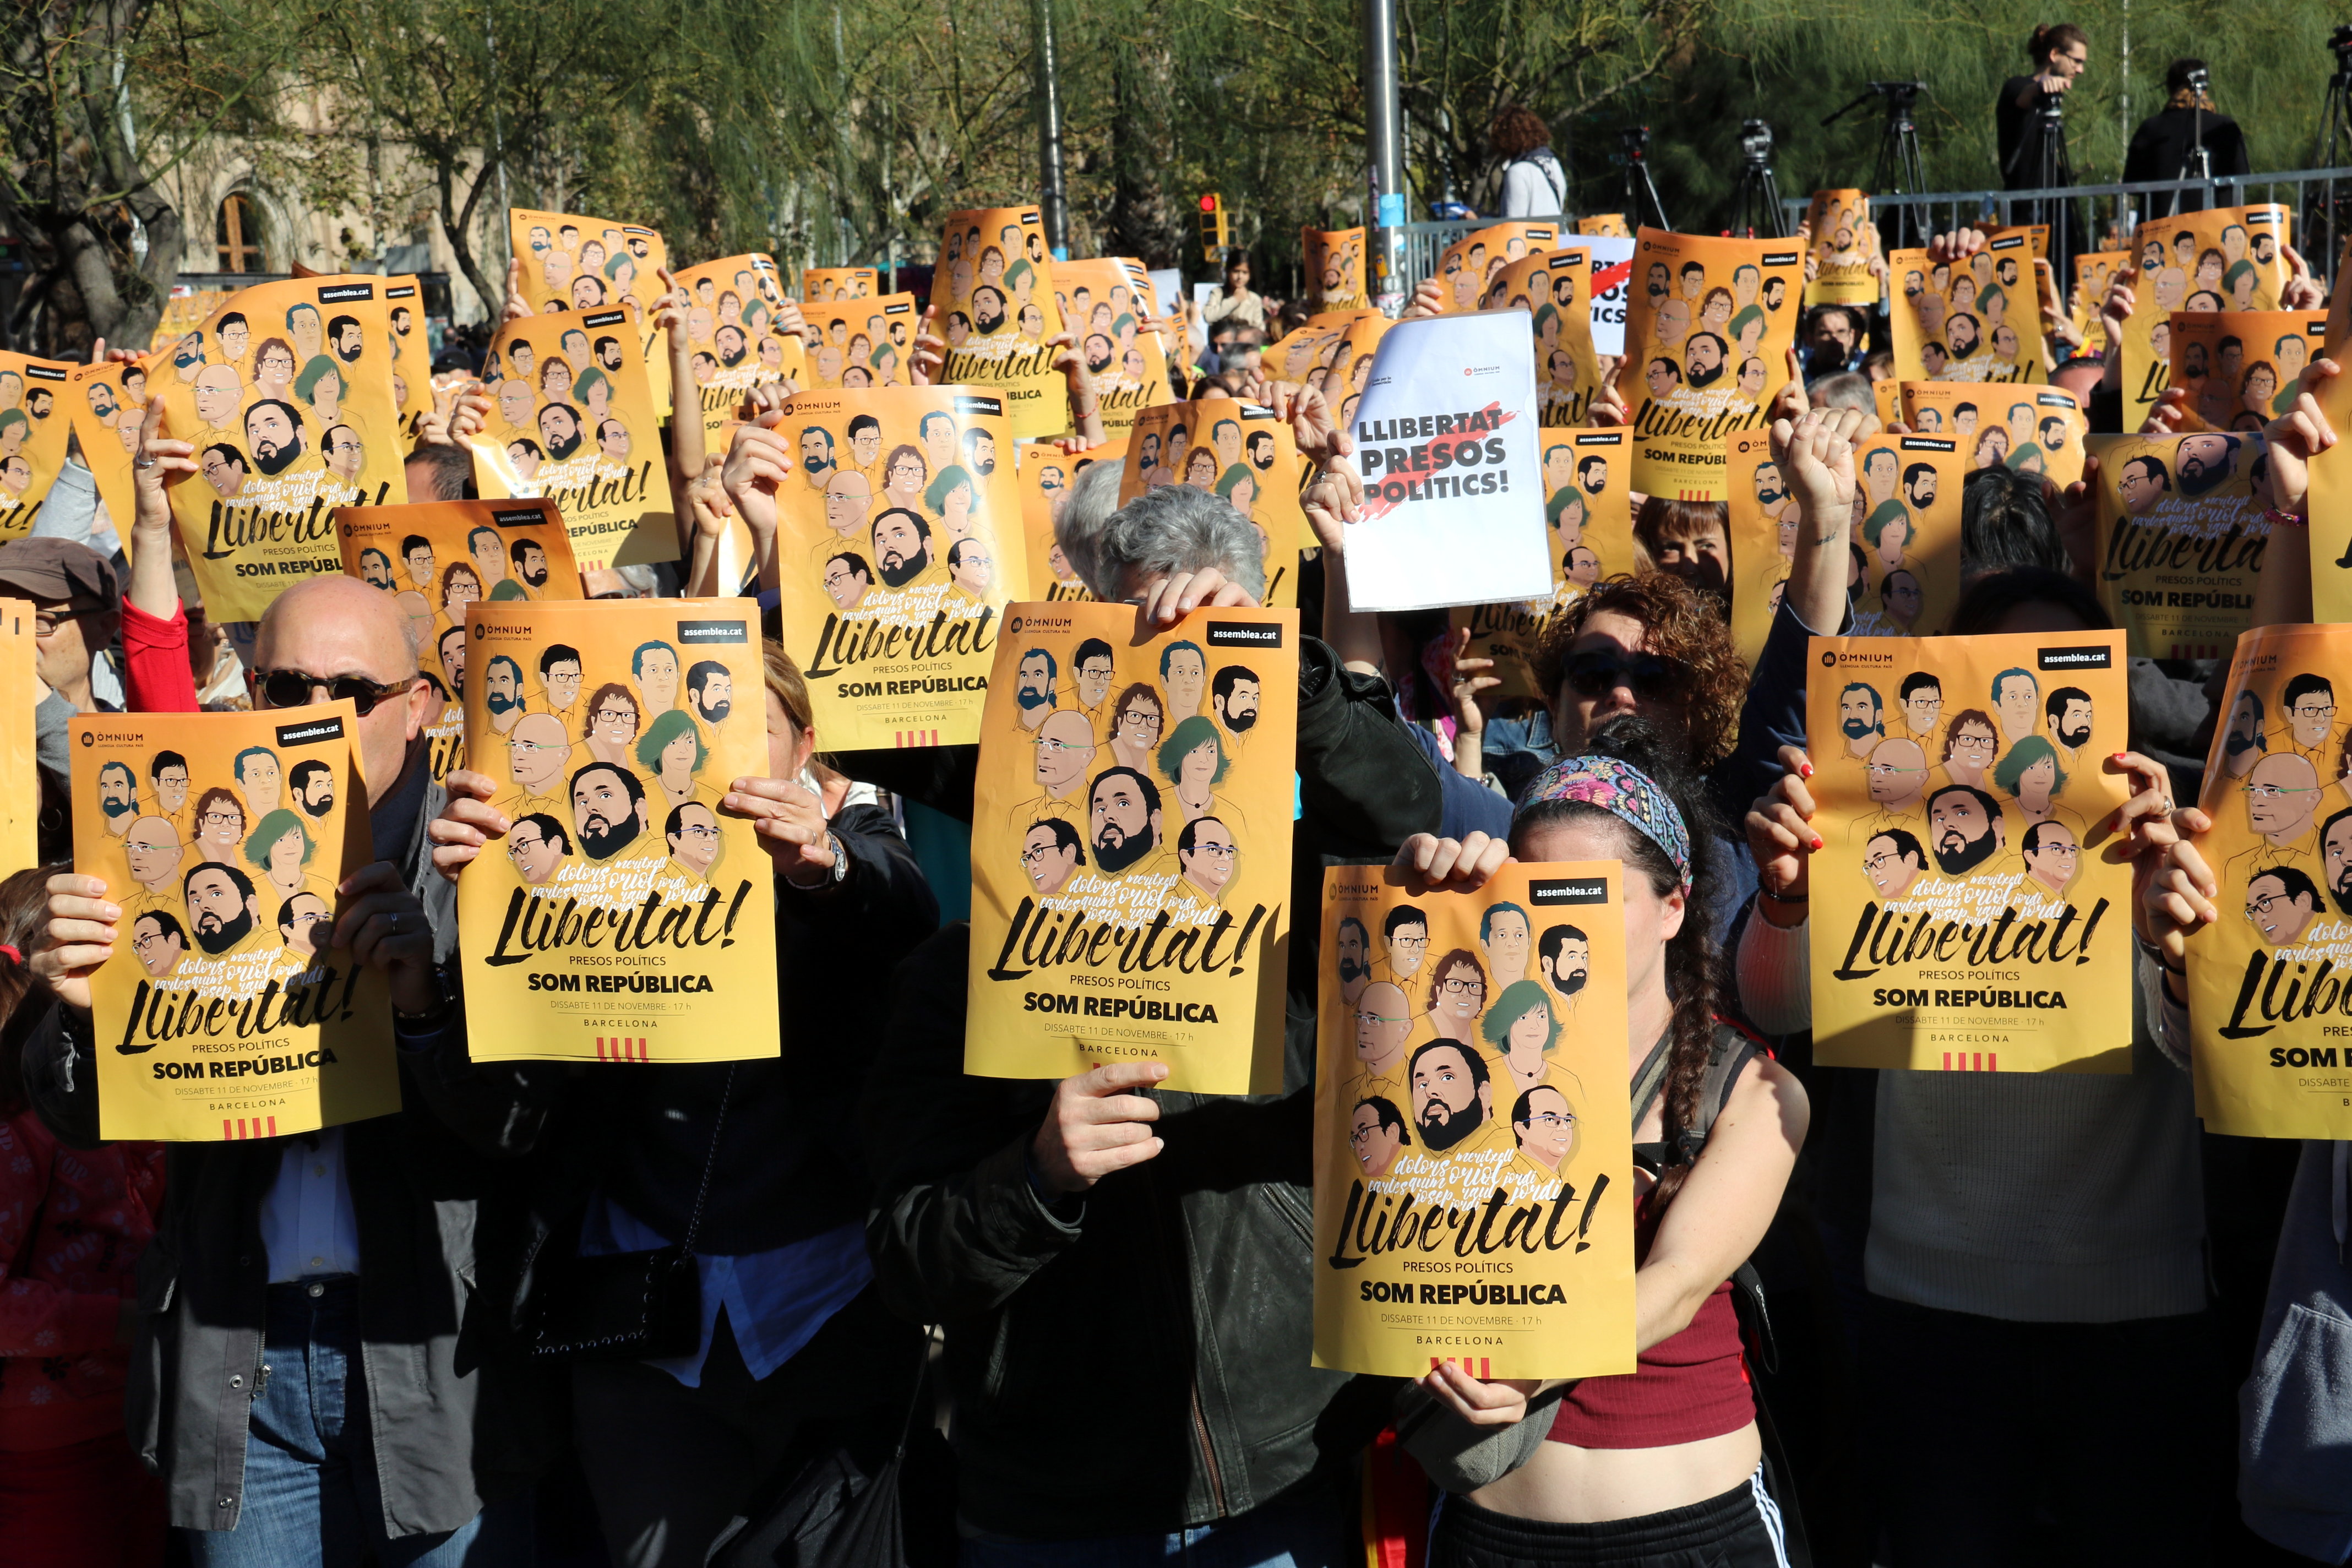 A protest in University square in Barcelona asking for the freedom of political prisoners on November 5 (by ACN)